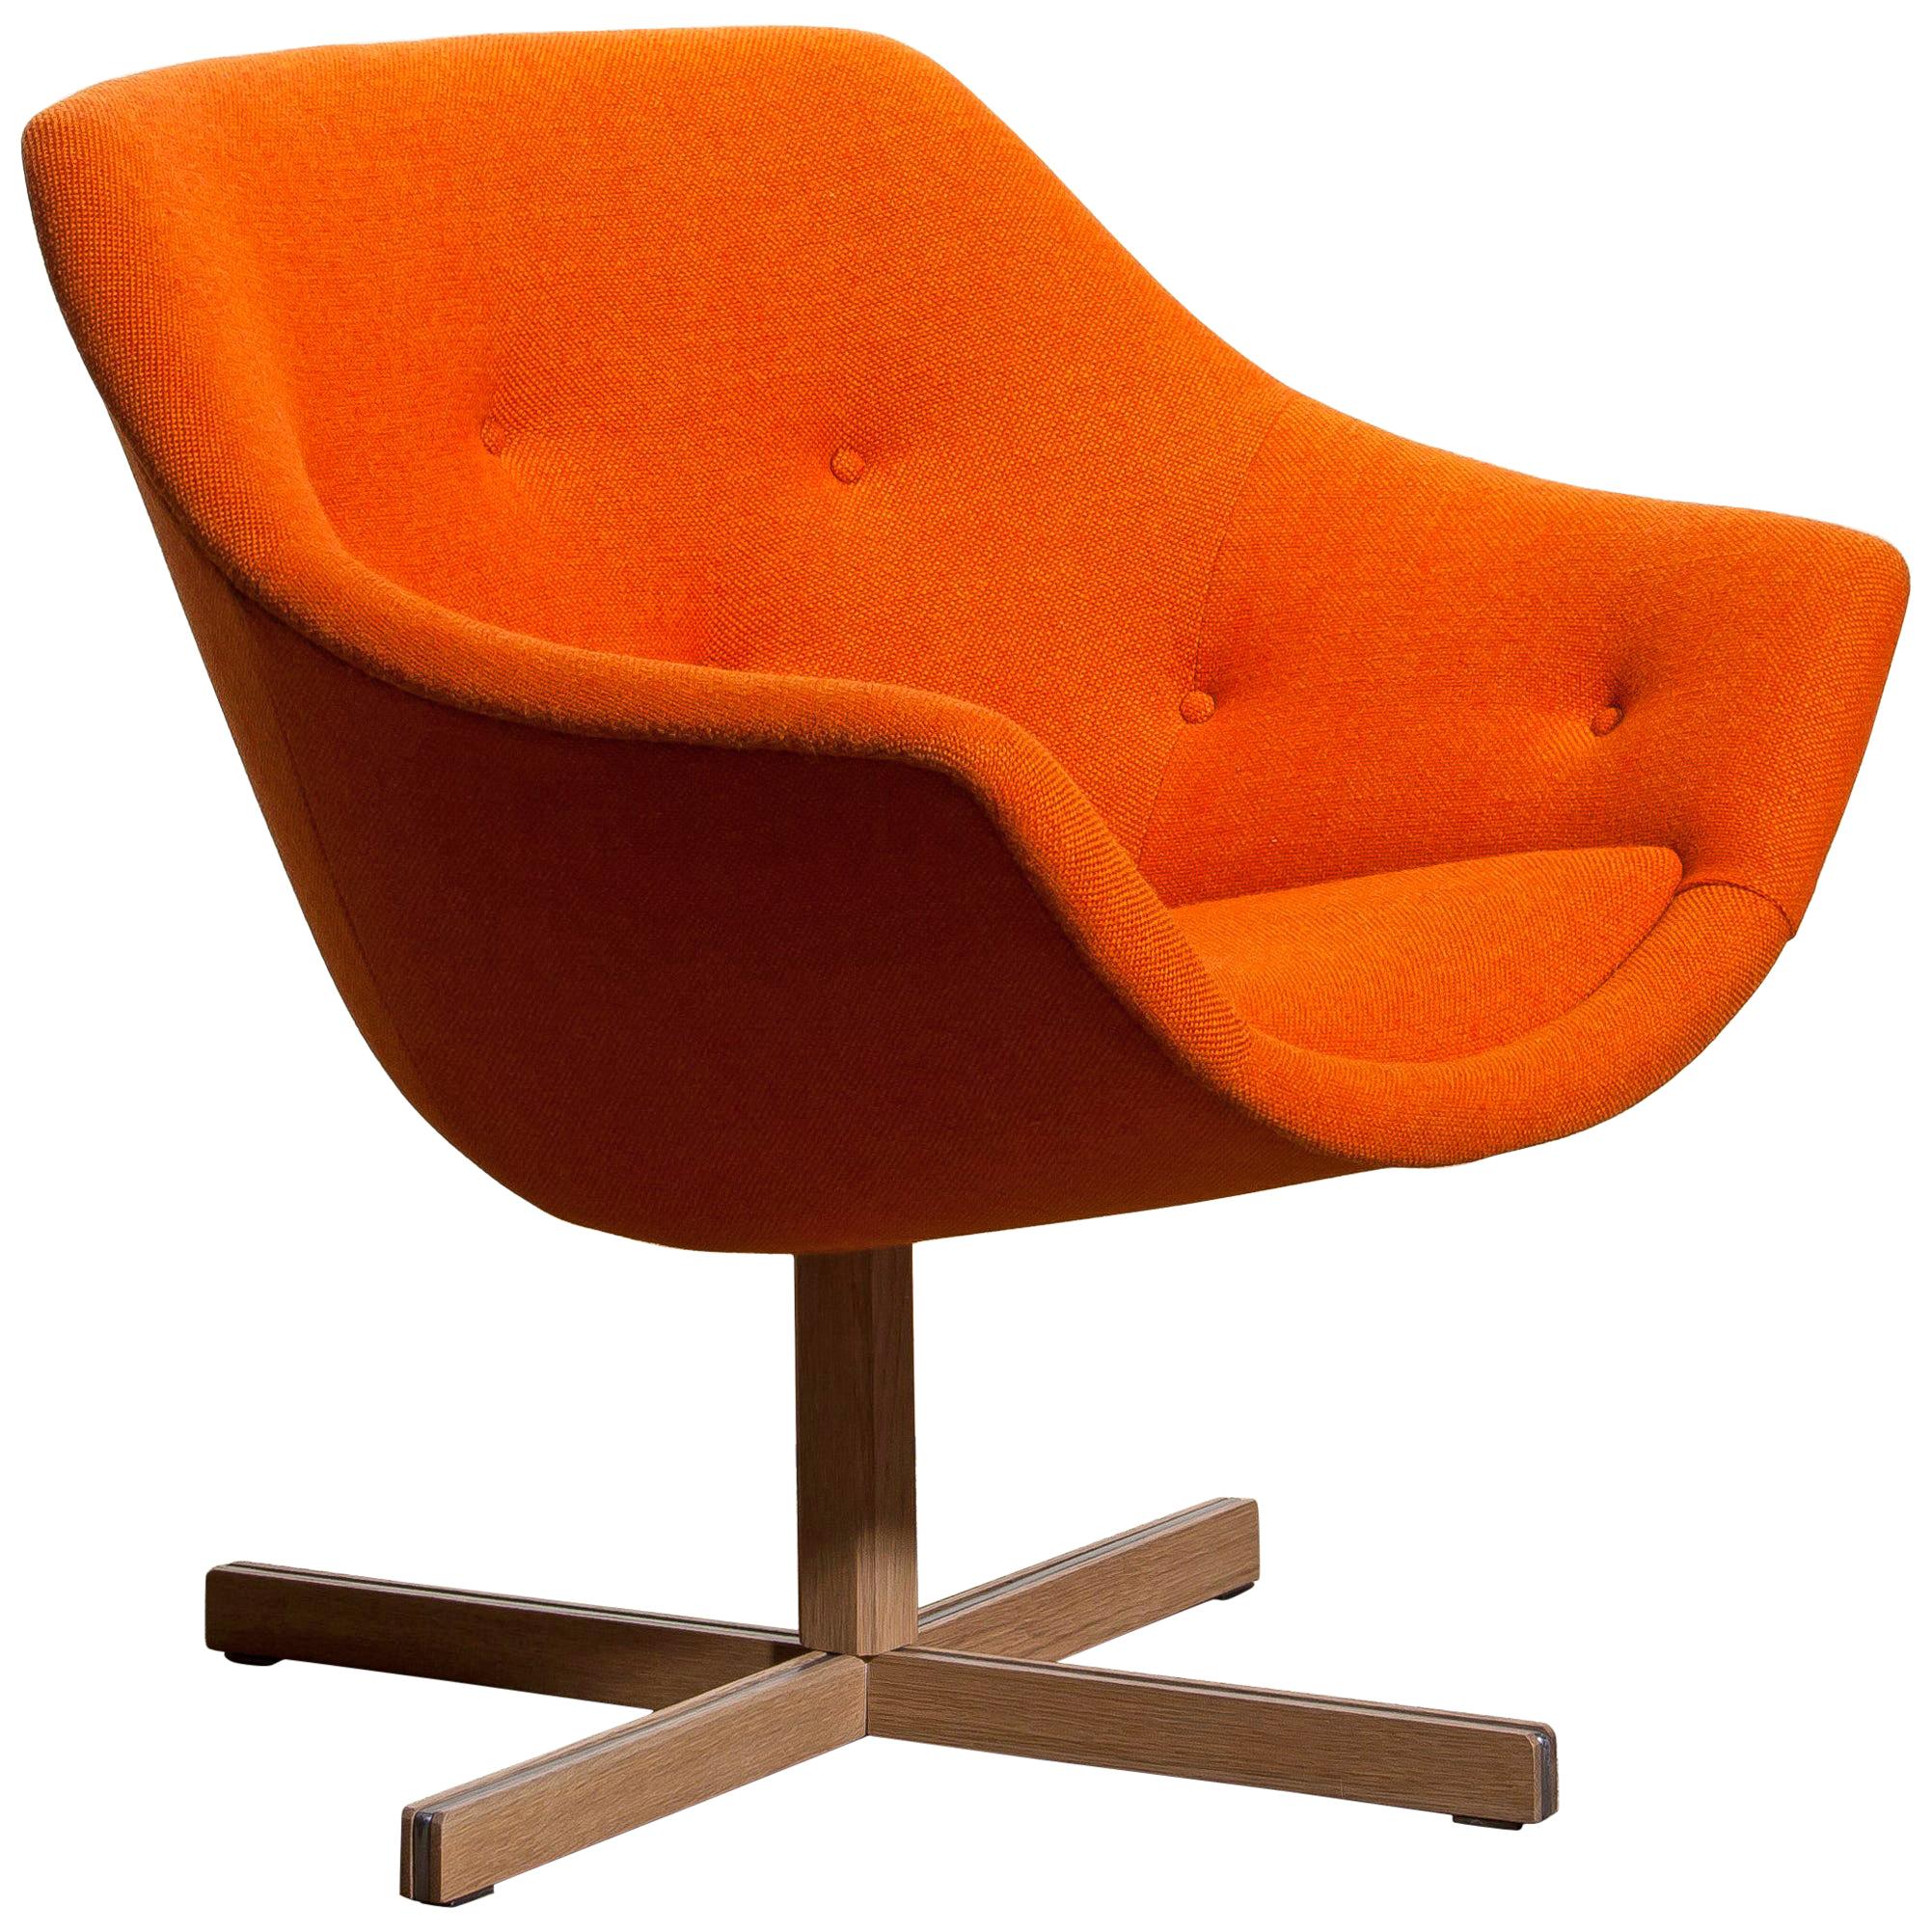 Fantastic 'Mandarini' swivel armchair made by Carl Gustaf Hiort for Puunveisto Oy, wood work Ltd. This chair is upholstered with a buttoned orange fabric 'Hallingdal' by Kvadrat designed by Nanna Ditzel on an oak swivel base.
It is in perfect and